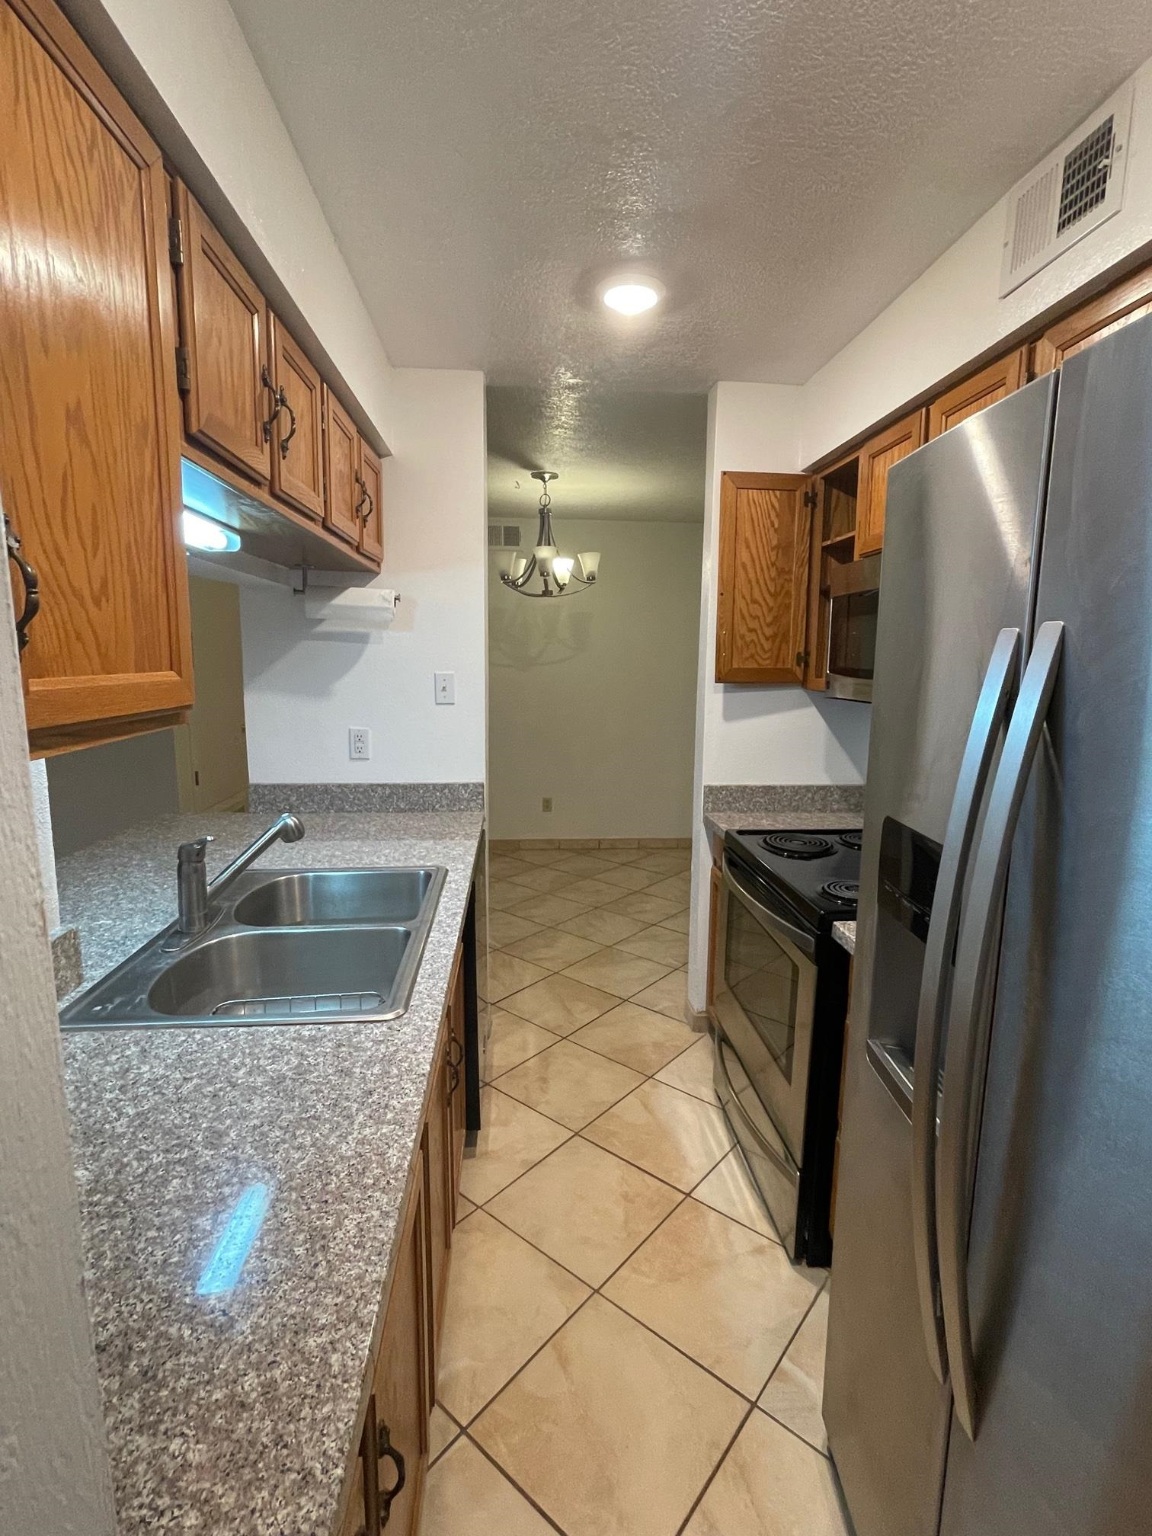 505 OPPENHEIMER, Los Alamos, New Mexico 87544, 1 Bedroom Bedrooms, ,1 BathroomBathrooms,Residential,For Sale,505 OPPENHEIMER,202104149